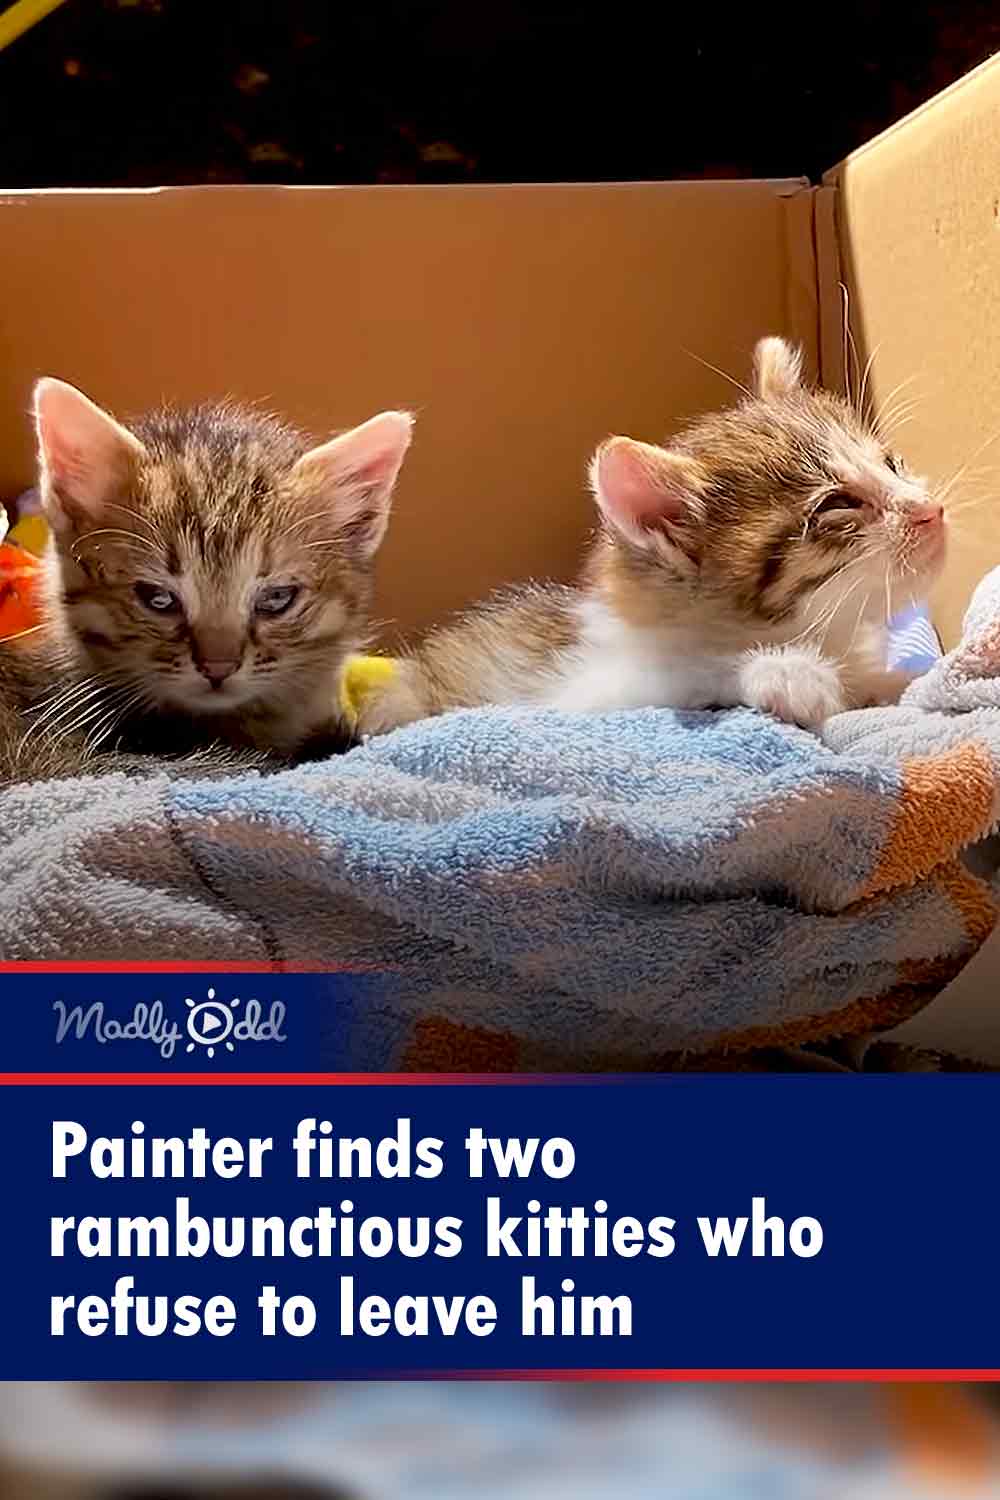 Painter finds two rambunctious kitties who refuse to leave him